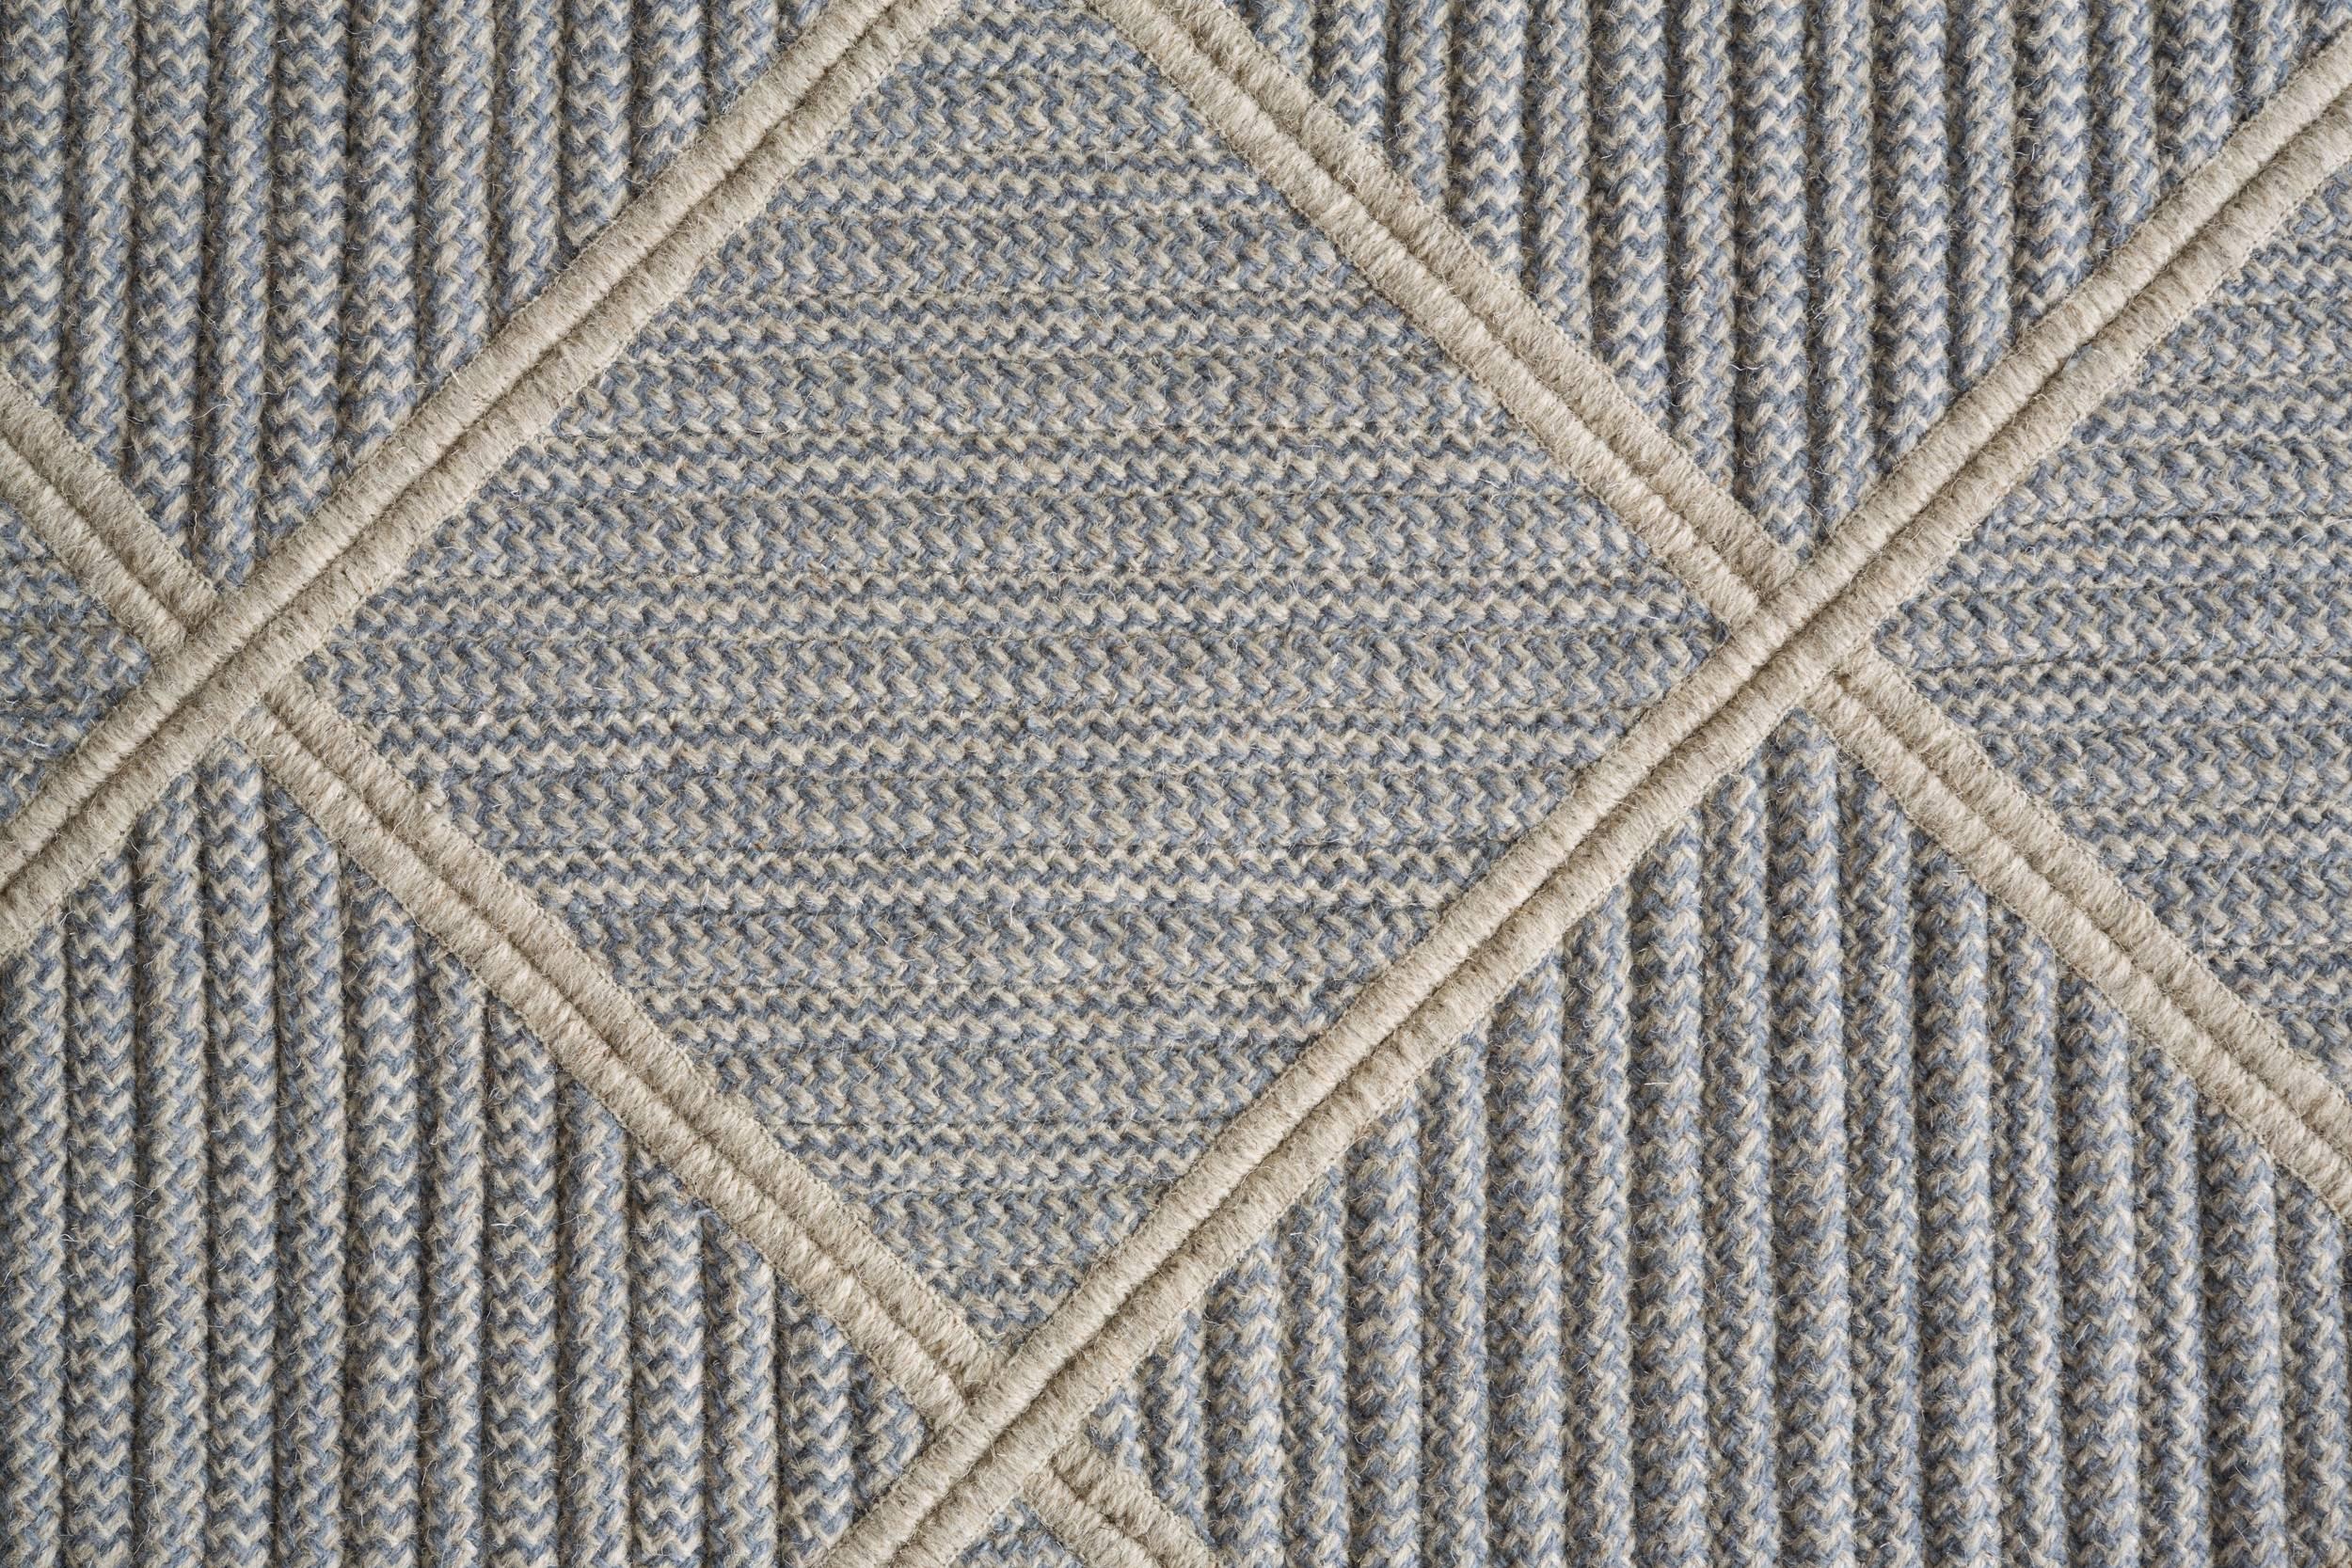 Our Terrain Rug is created by combining blue wool blend with a neutral base of light grey natural un-dyed wool. Alternating styles of cable-woven braid is sewn diagonally, combined and then cut into a circle.  Designed in the Thayer Design Boston